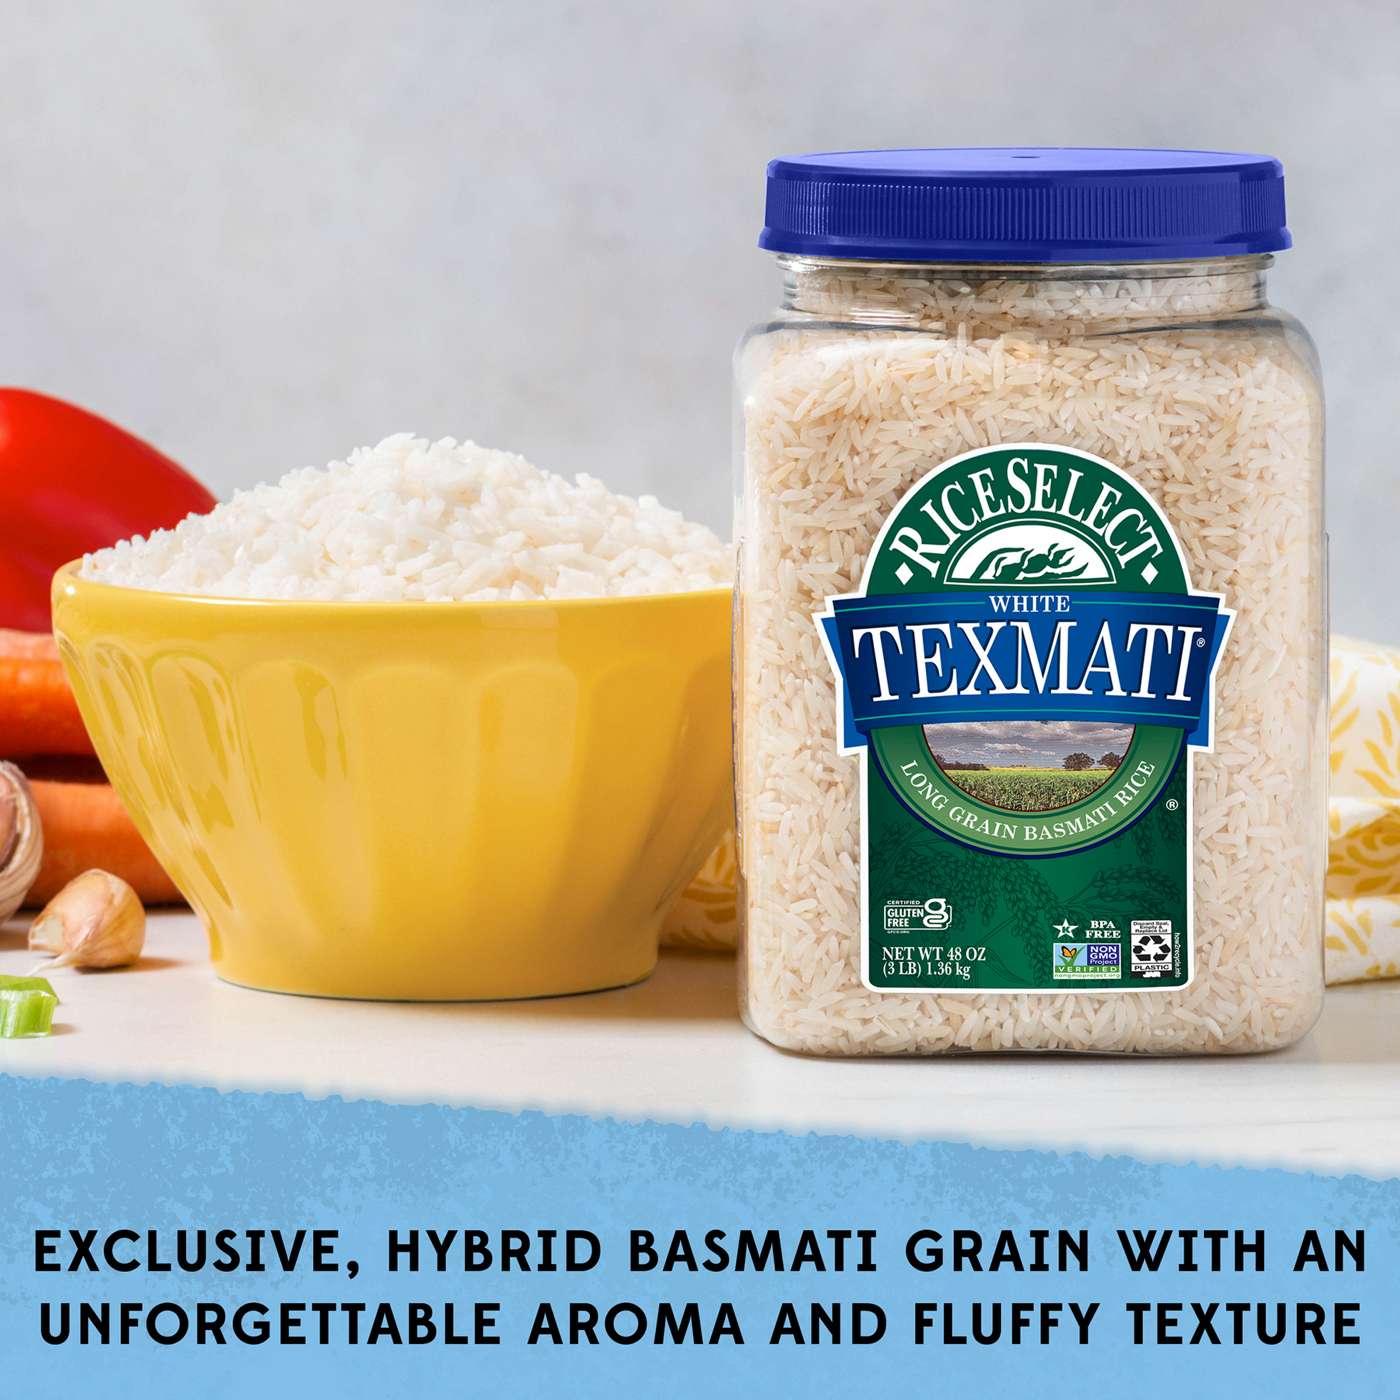 RiceSelect Texmati Rice; image 3 of 6